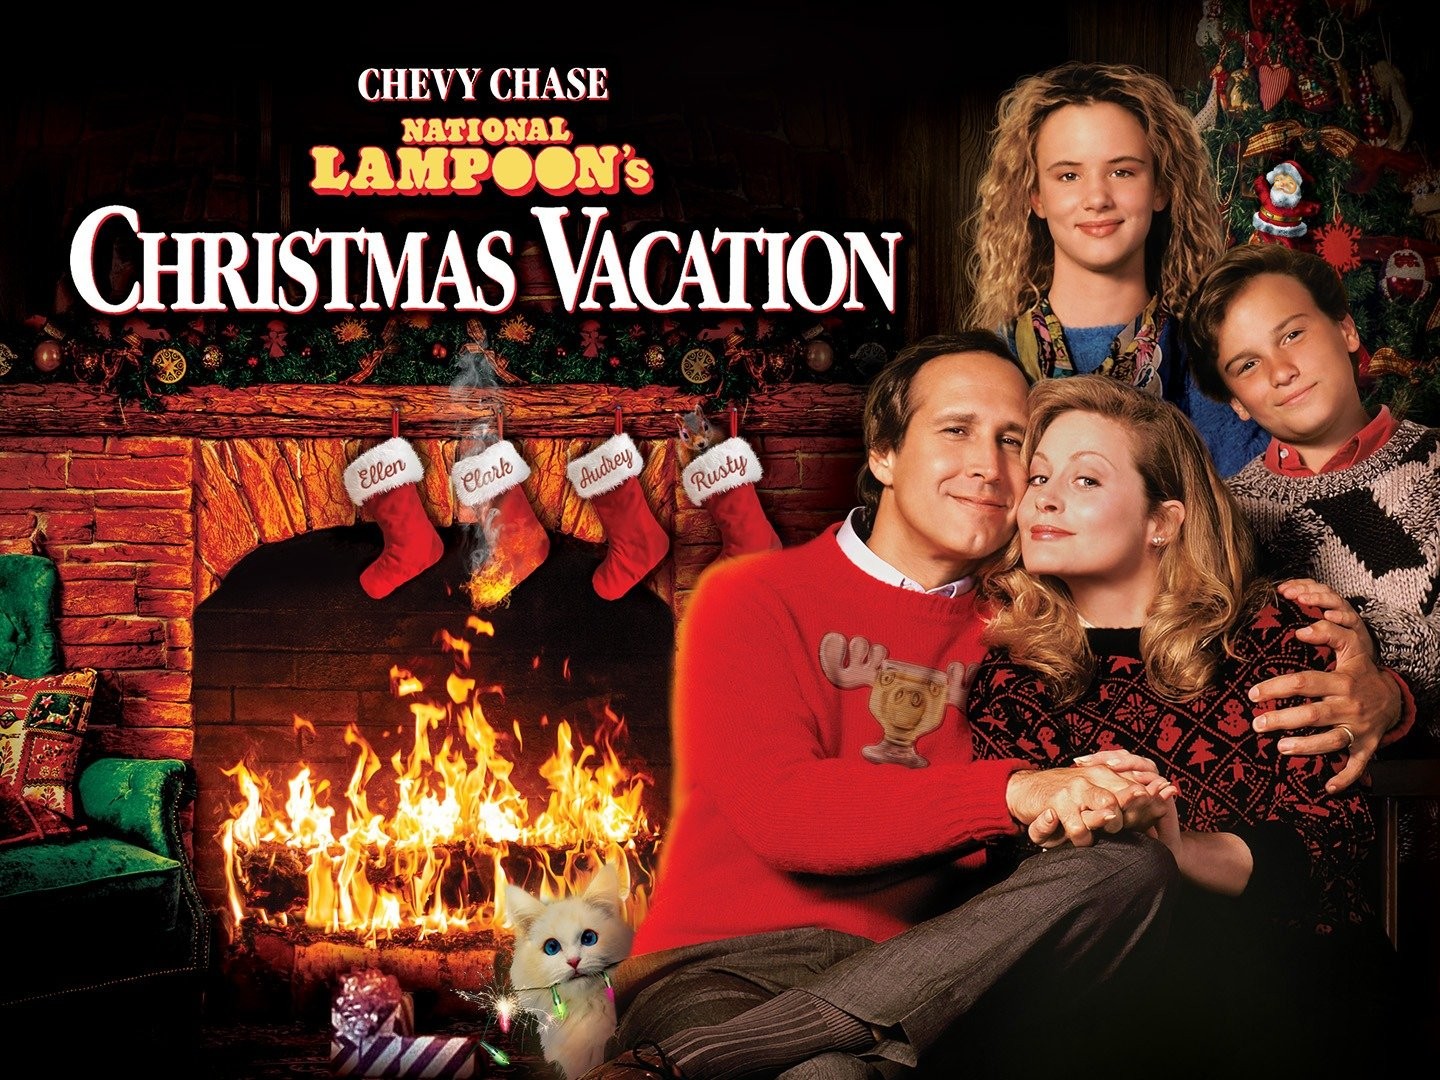 National Lampoon's Christmas Vacation: Trailer 1 - Trailers